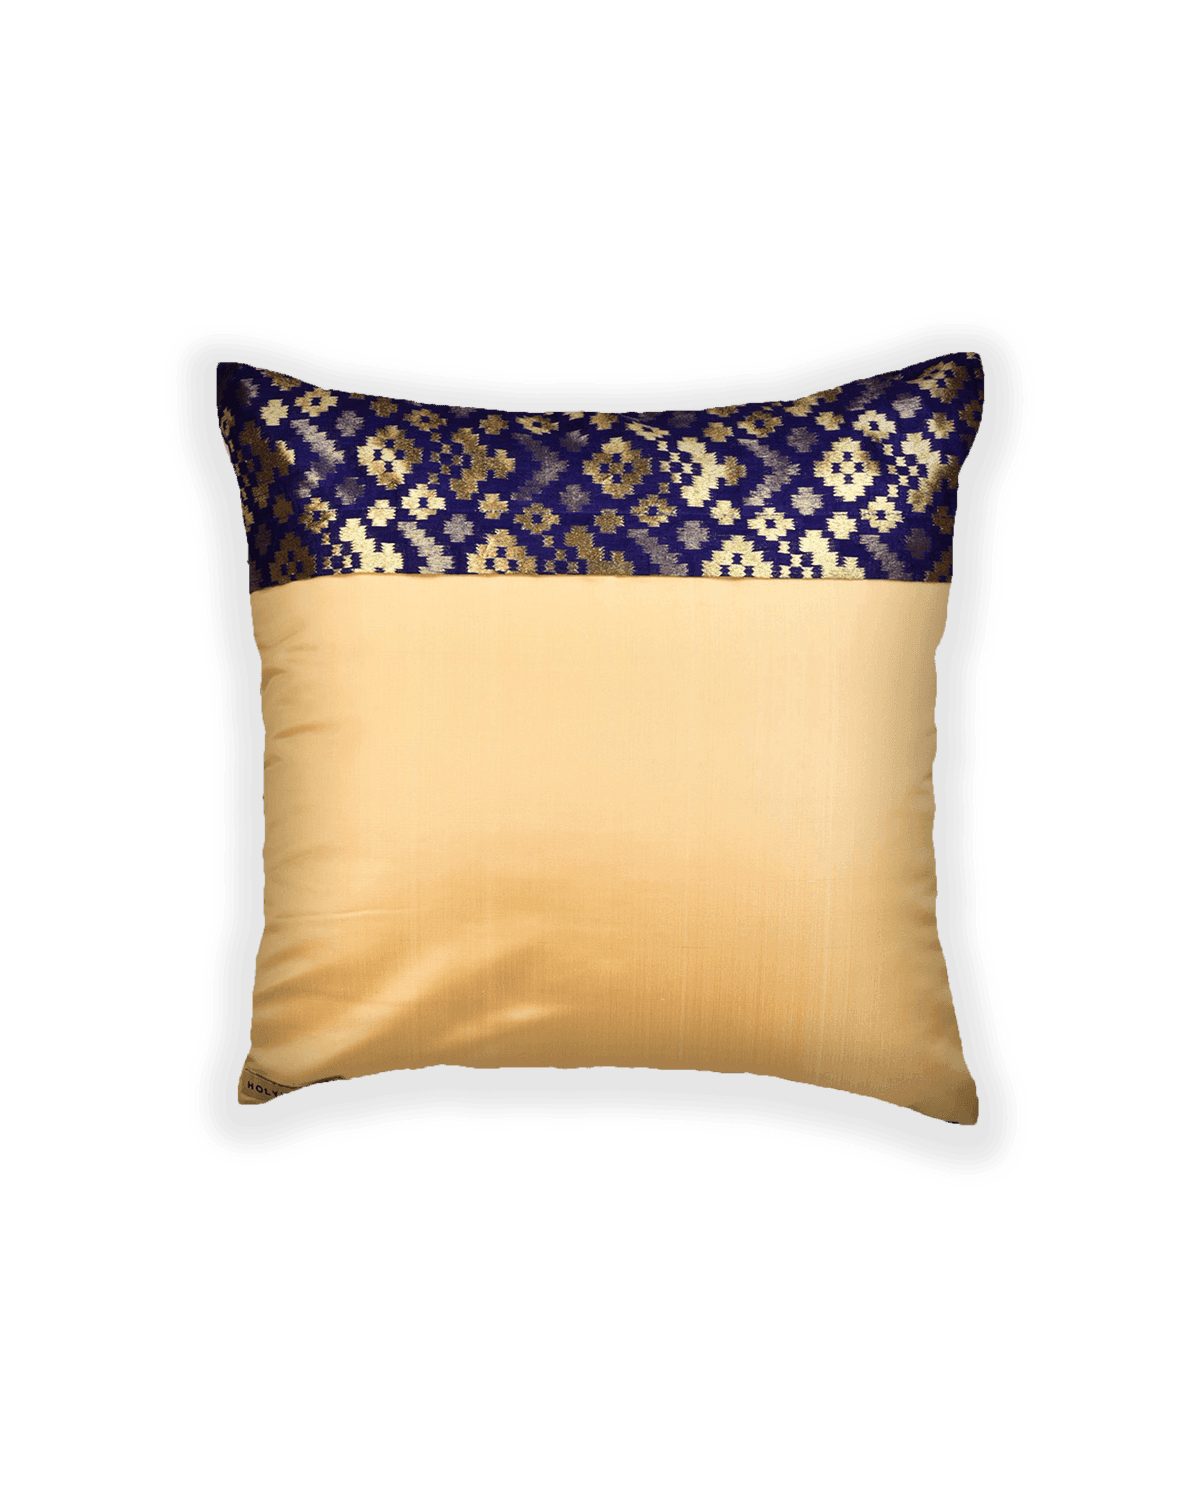 Blue Brocade Woven Poly Silk Cushion Cover with Satin Back 16" - By HolyWeaves, Benares